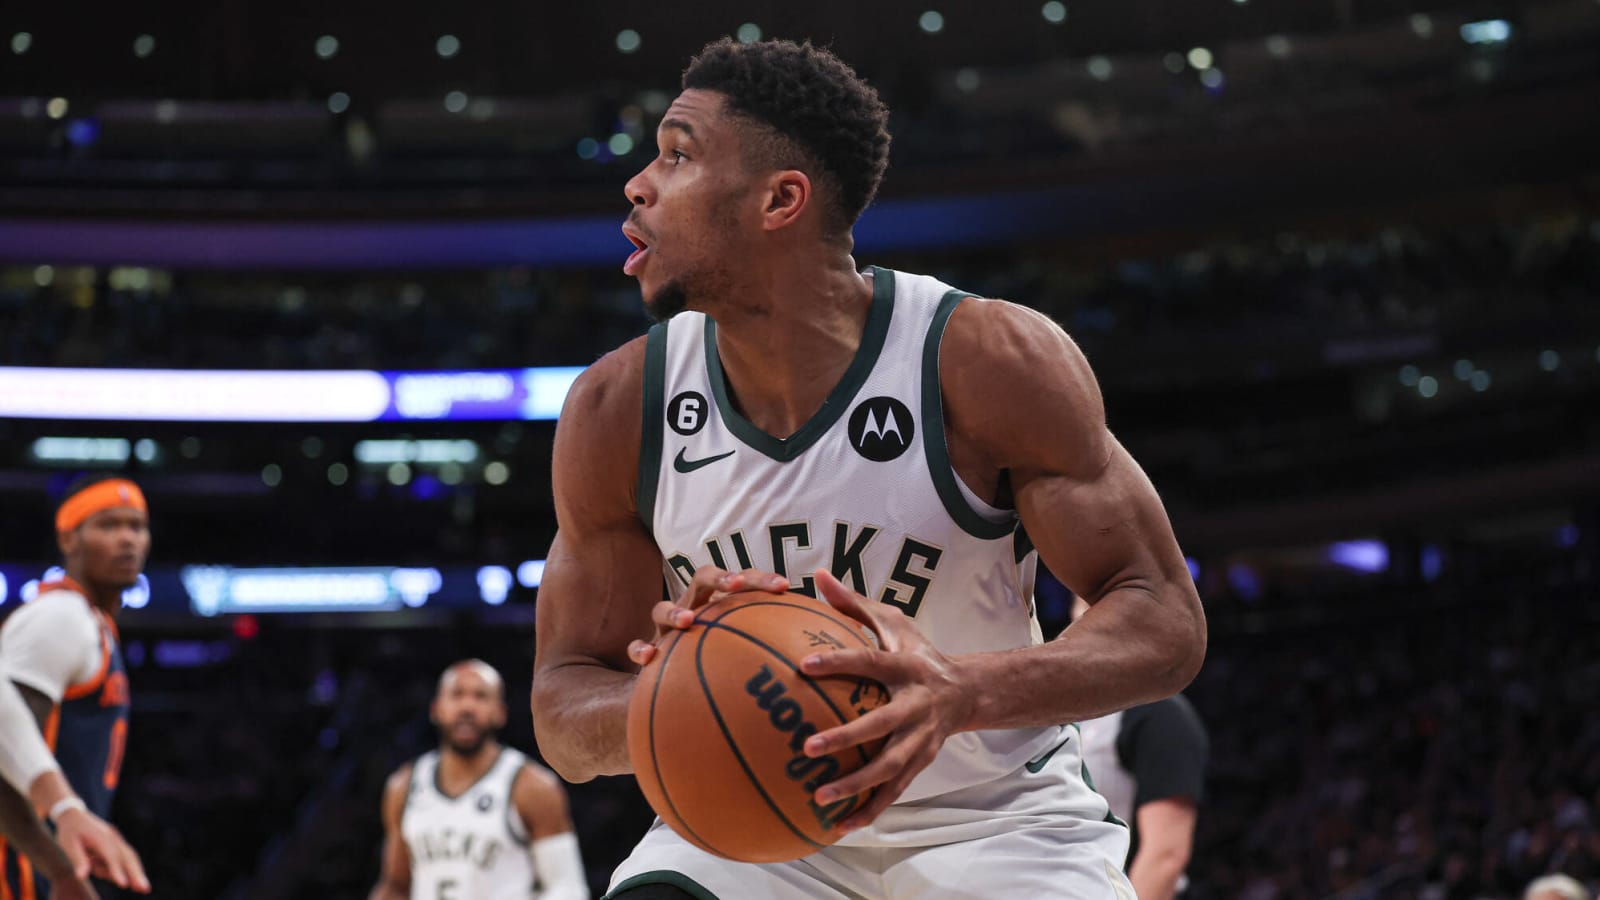 Former No. 2 overall pick appears to call out Giannis Antetokounmpo